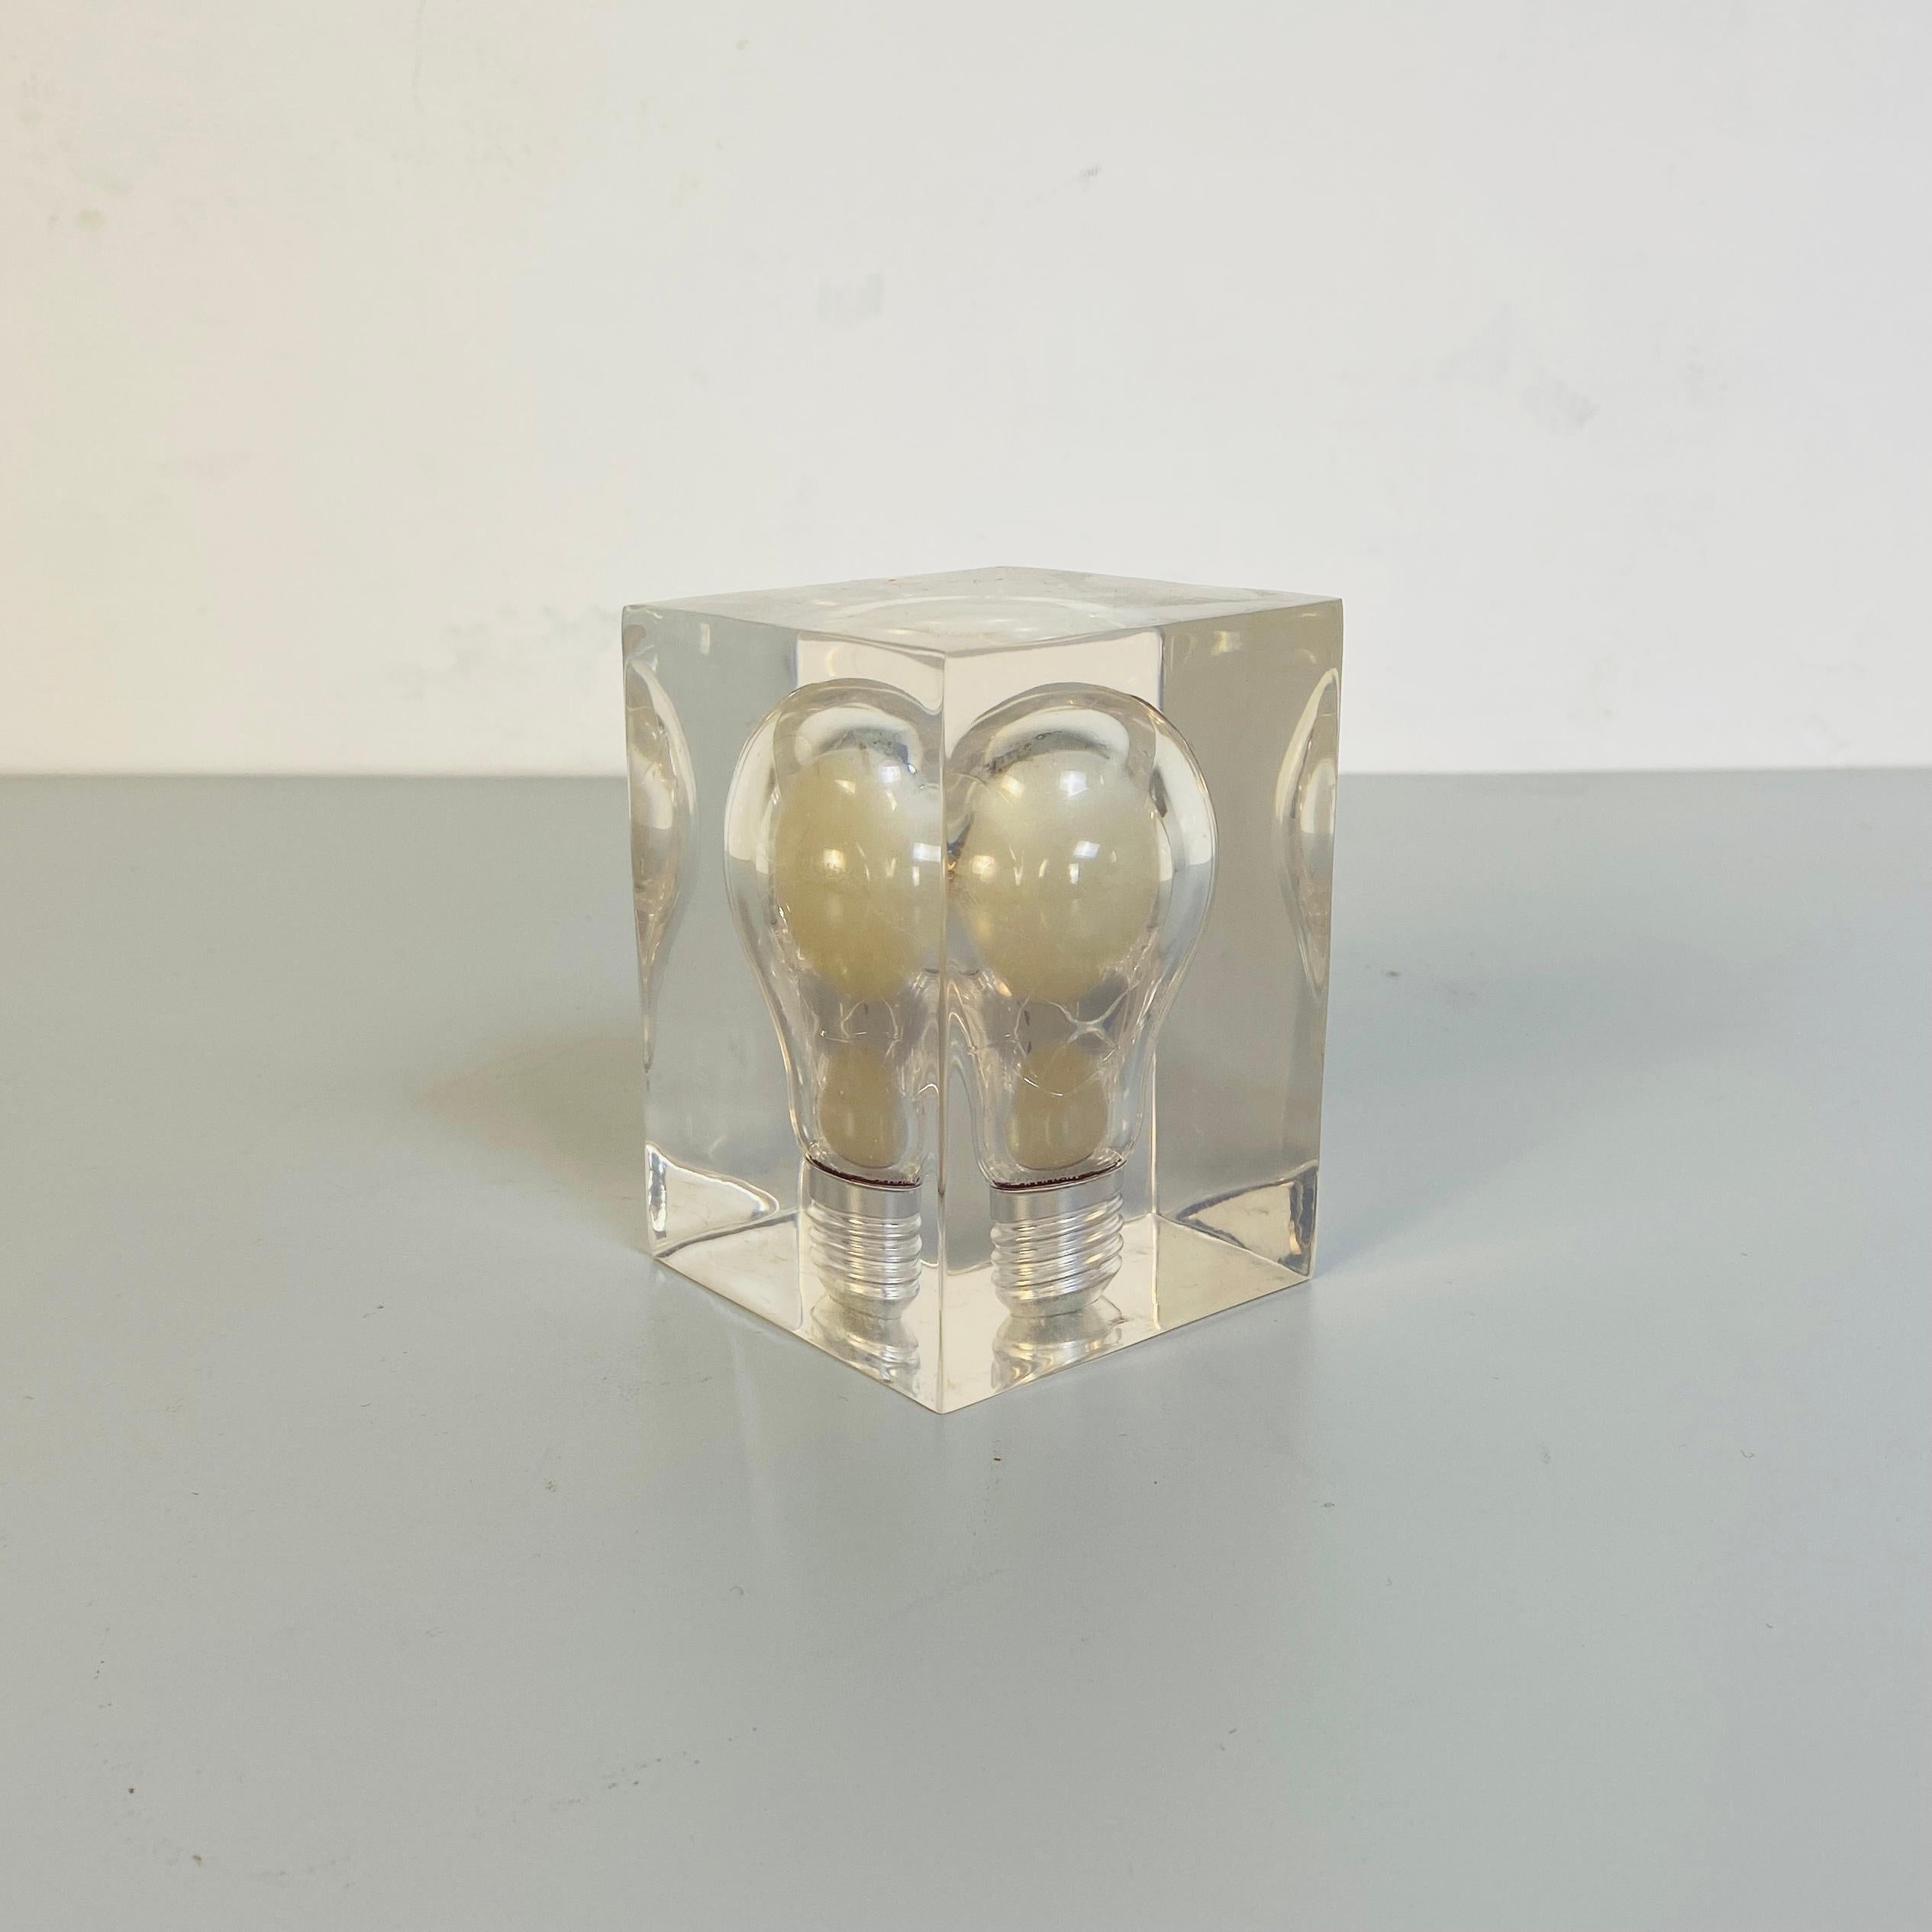 French Mid-Century Modern Lucite Sculpture by Pierre Giraudon, 1970s For Sale 1